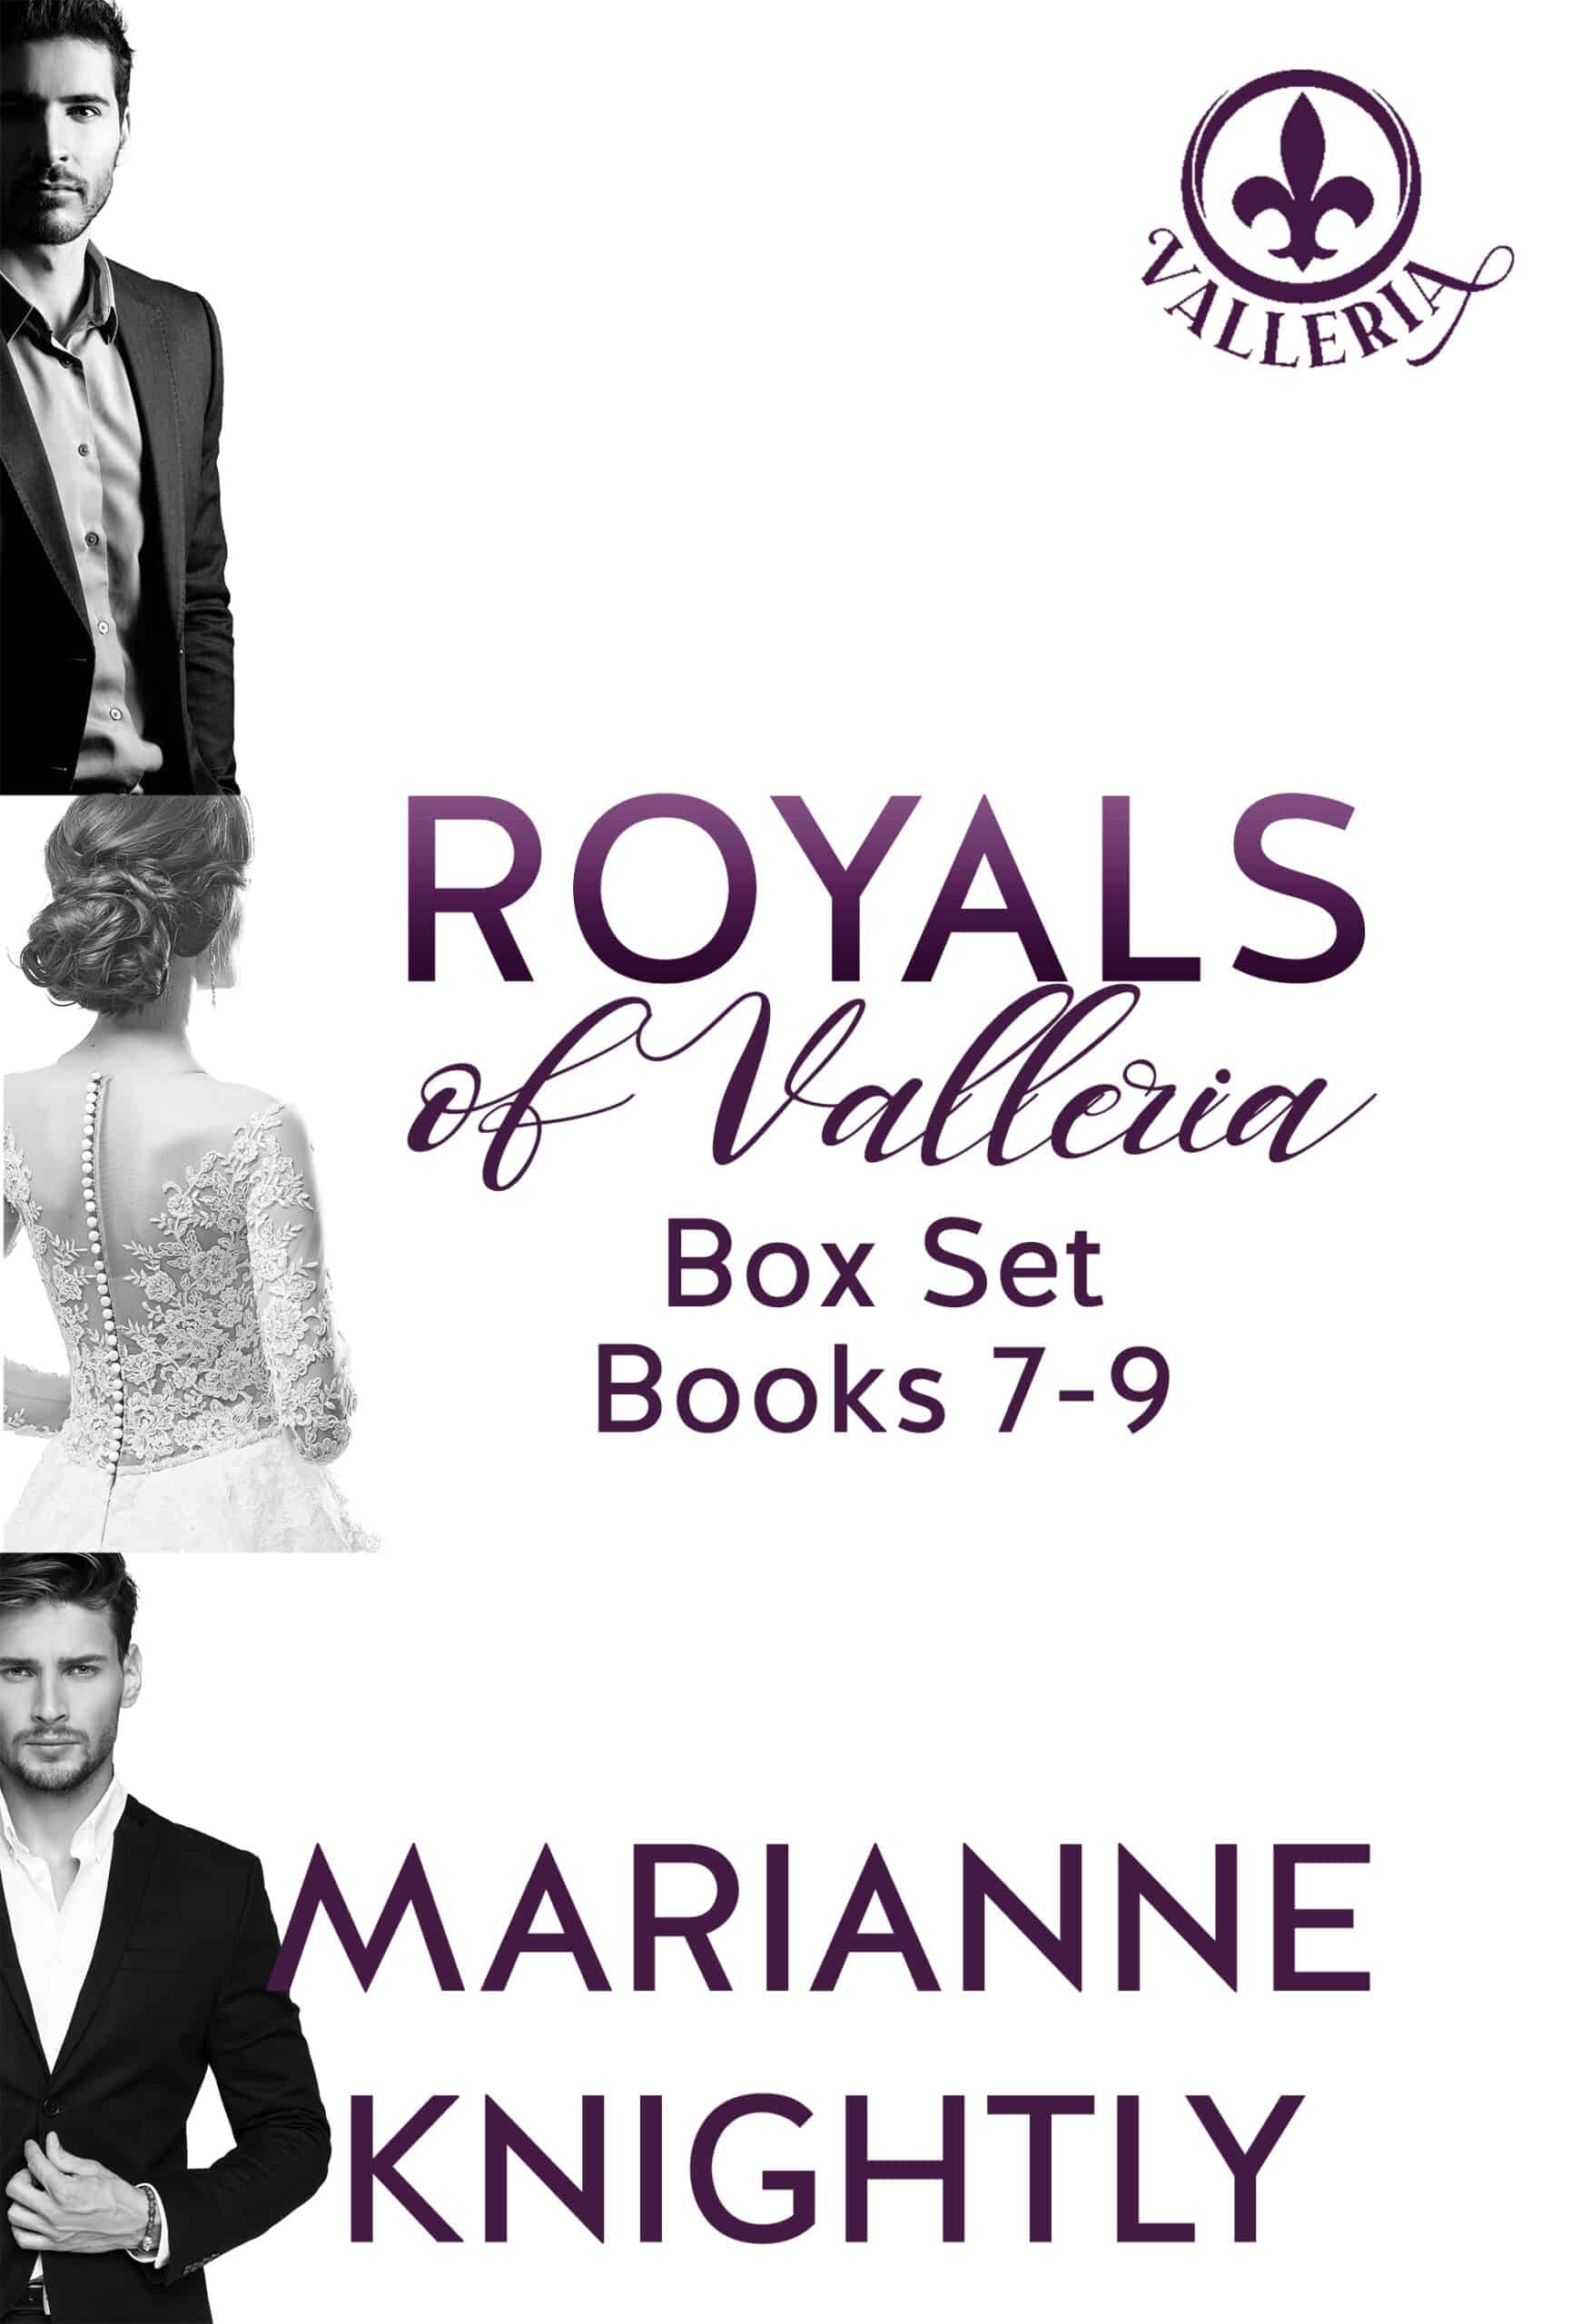 Royals of Valleria Box Set (Books 7-9) by Marianne Knightly